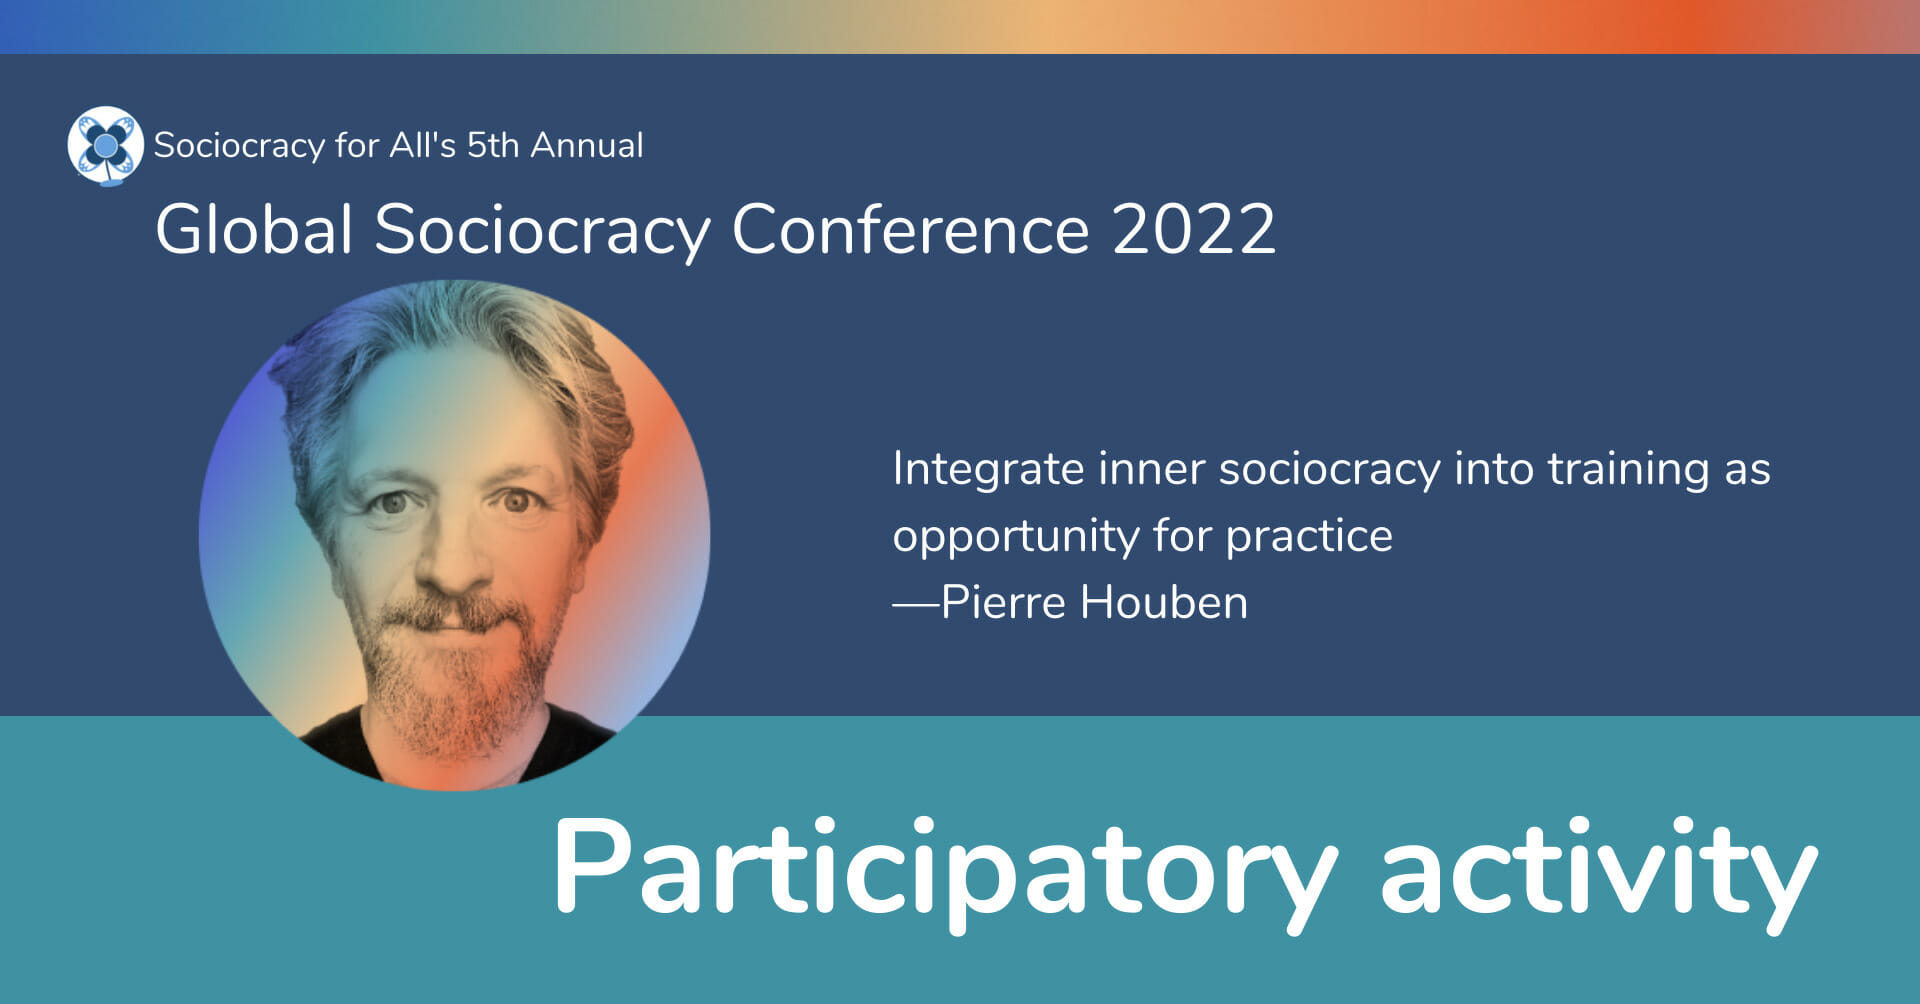 Integrate inner sociocracy into training as opportunity for practice —Pierre Houben